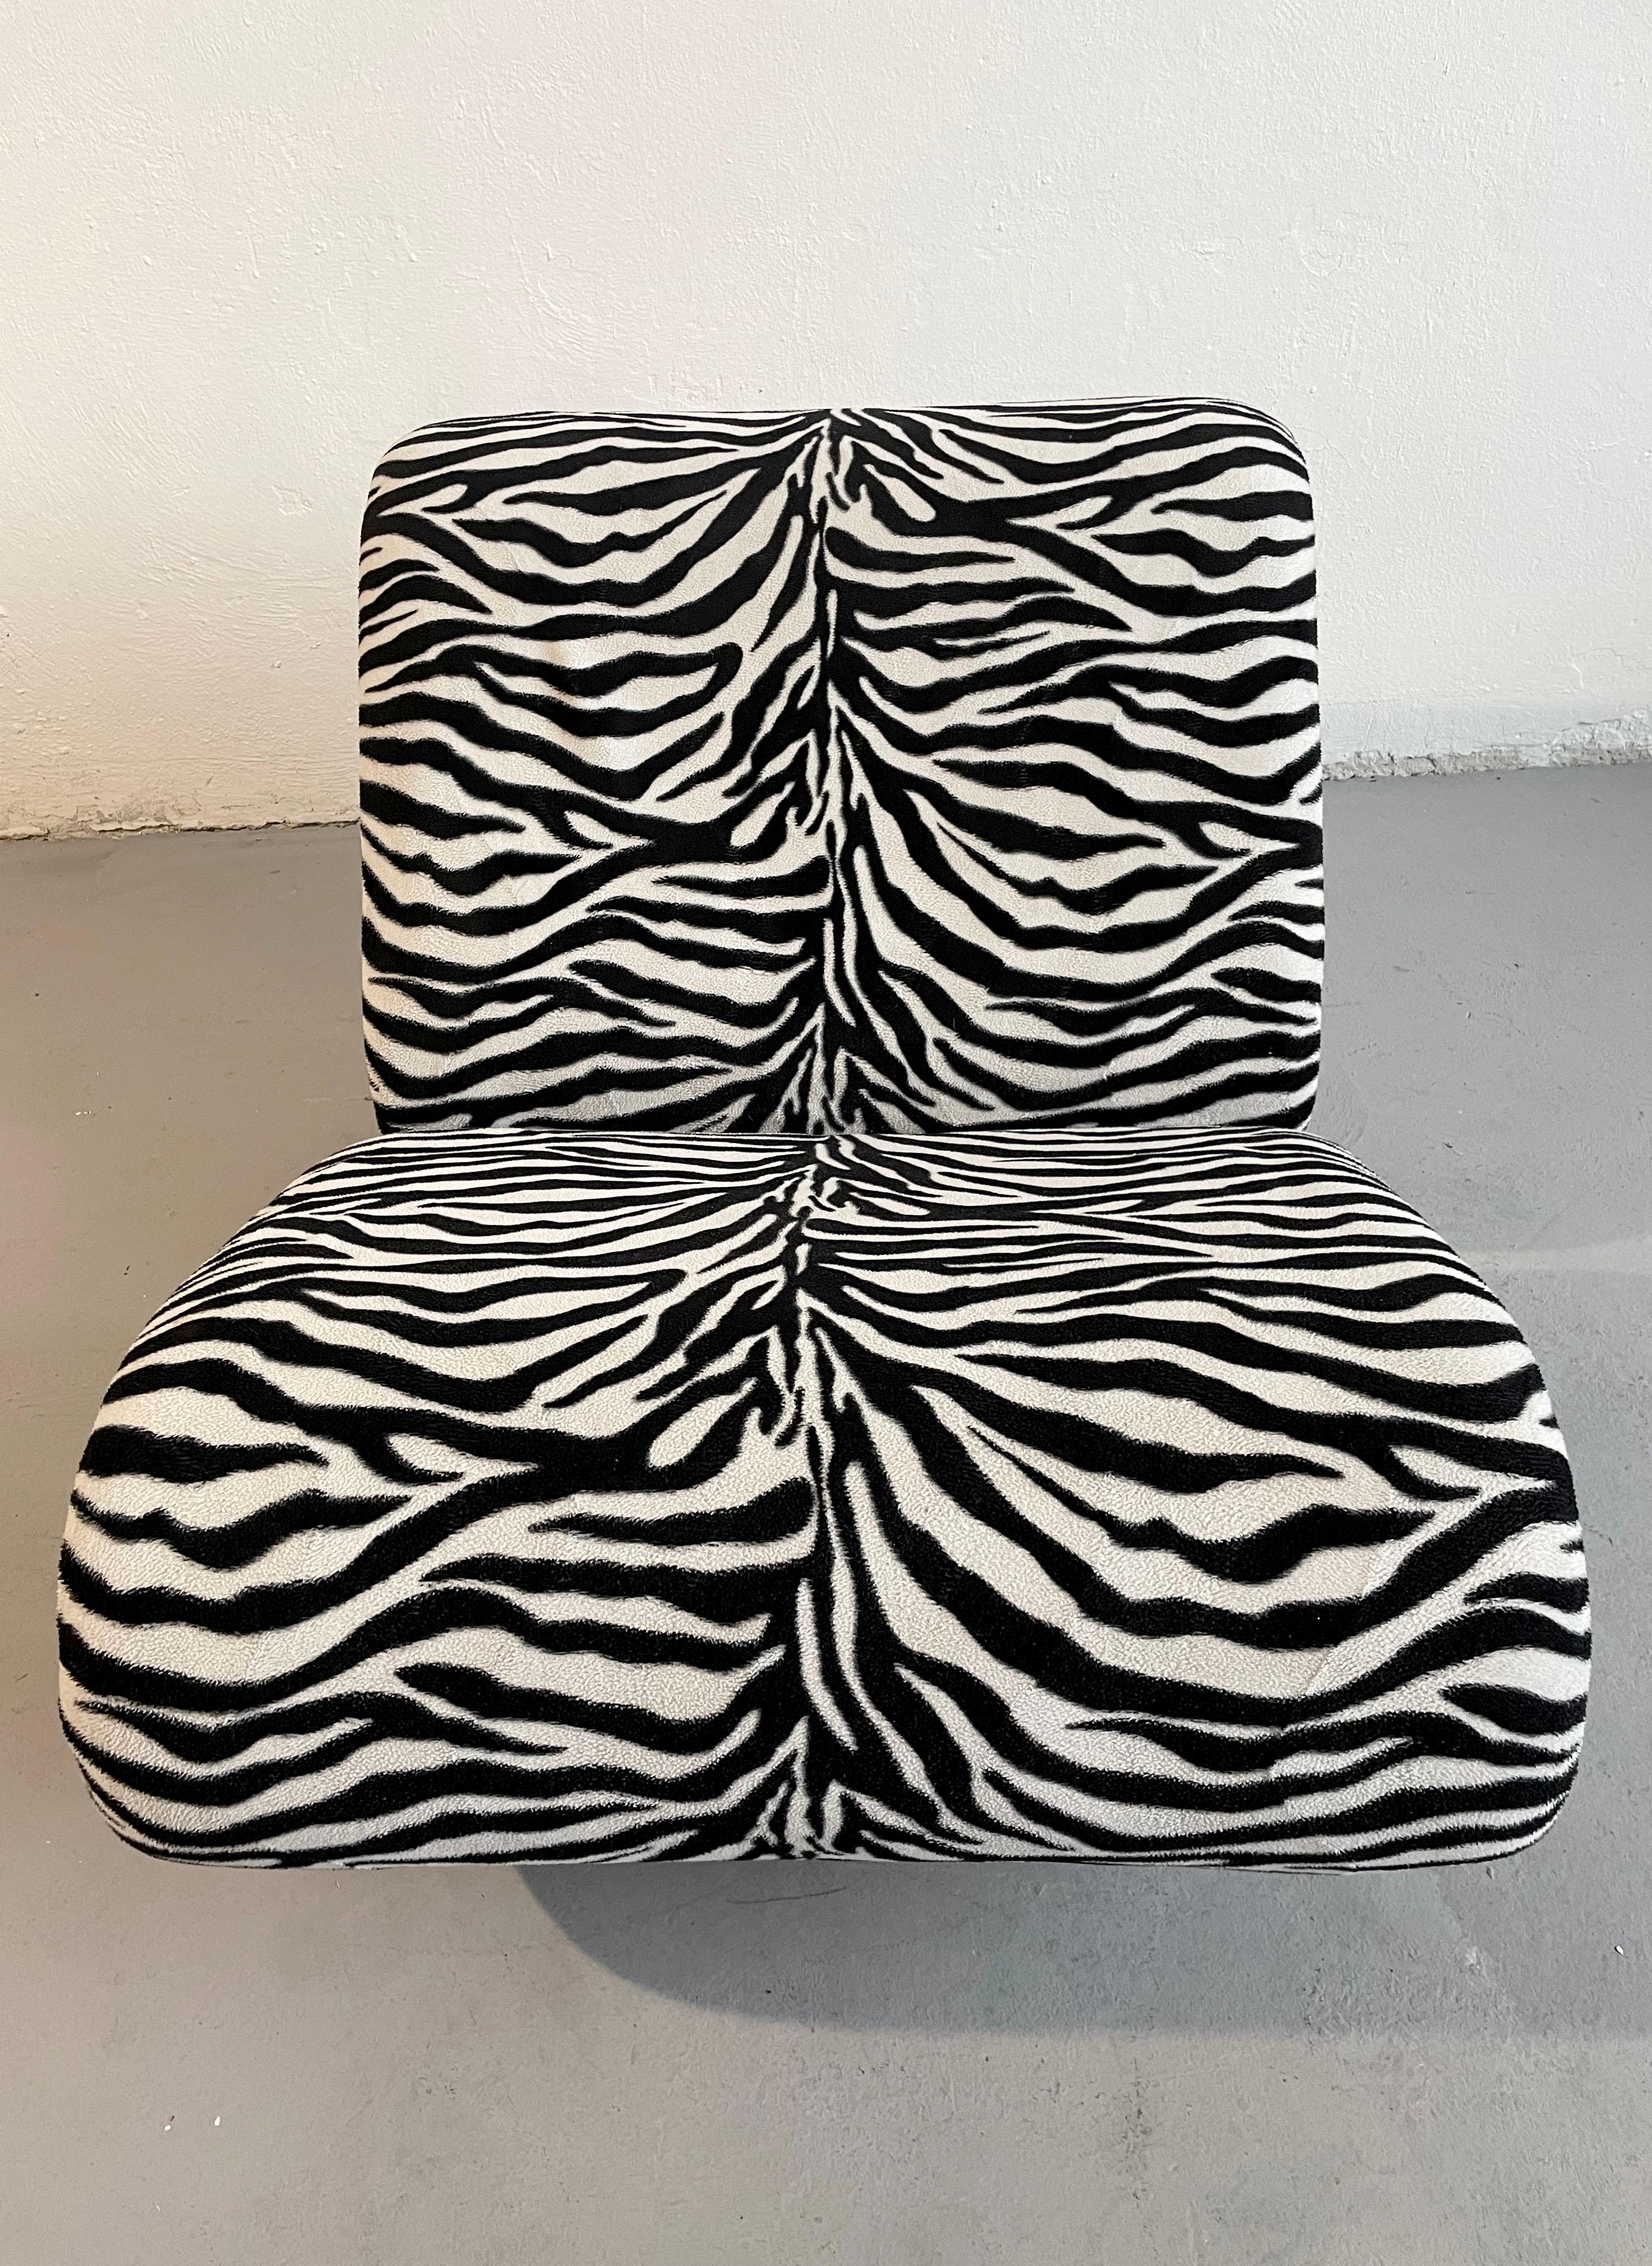 Vintage Sculptural Organic Shape Lounge Chair in Zebra Fabric, C1970s For Sale 4